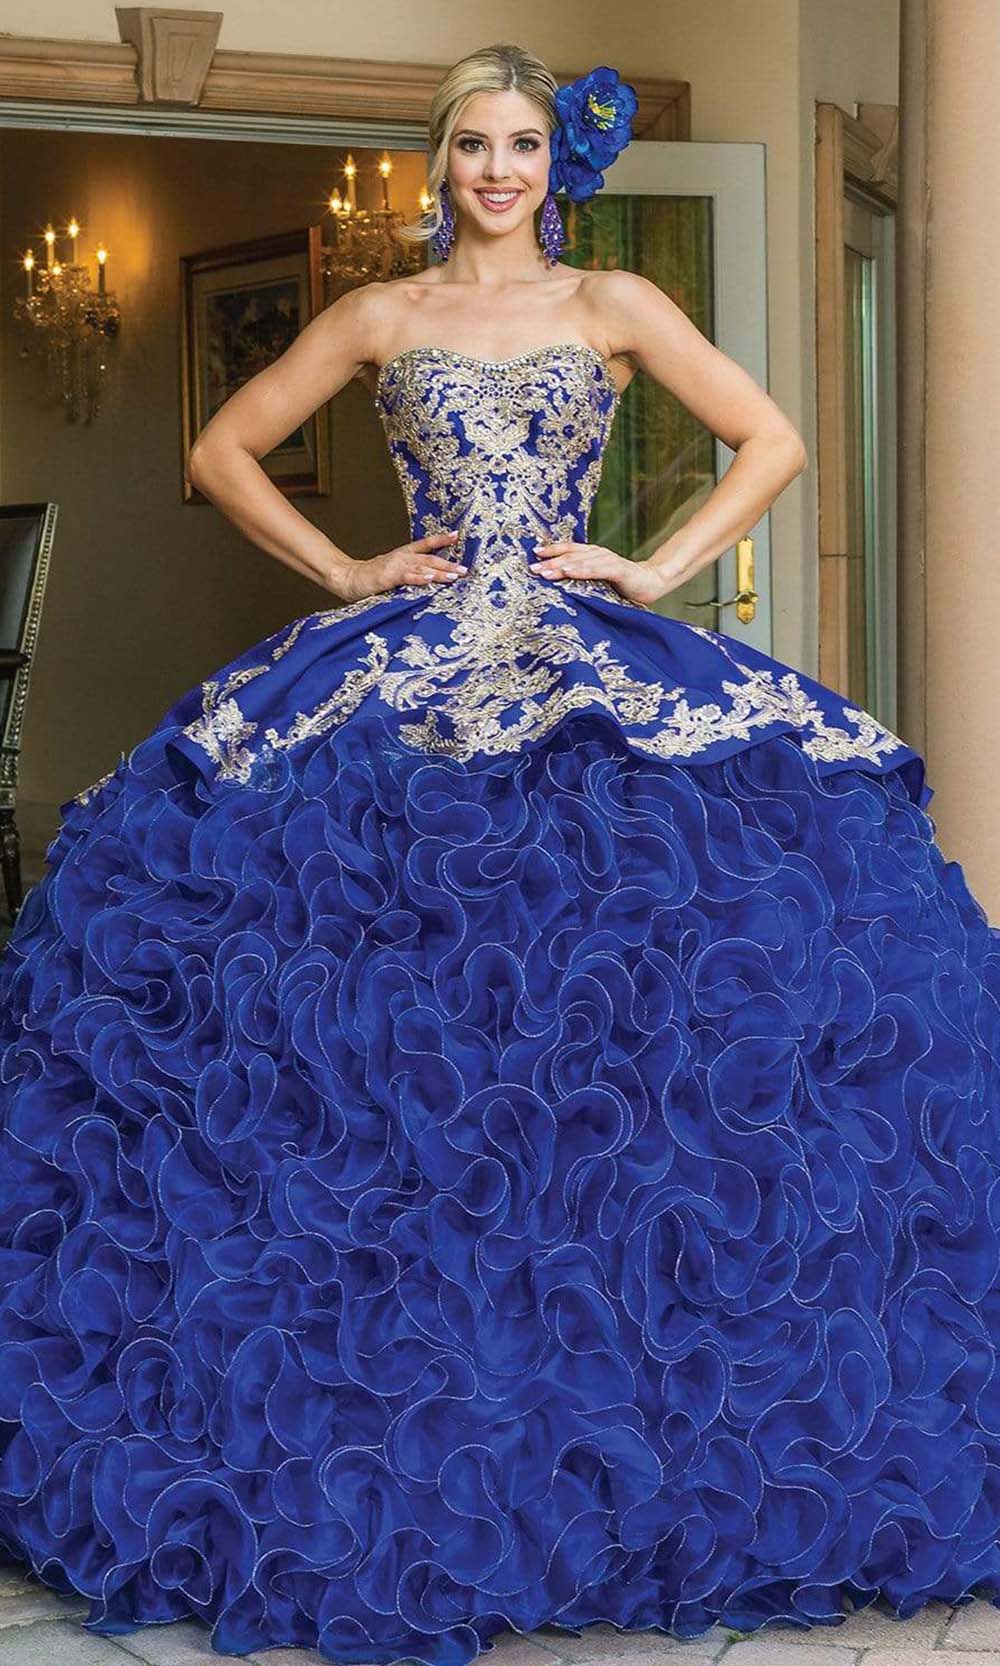 Dancing Queen - 1634 Strapless Embellished Ruffled Gown